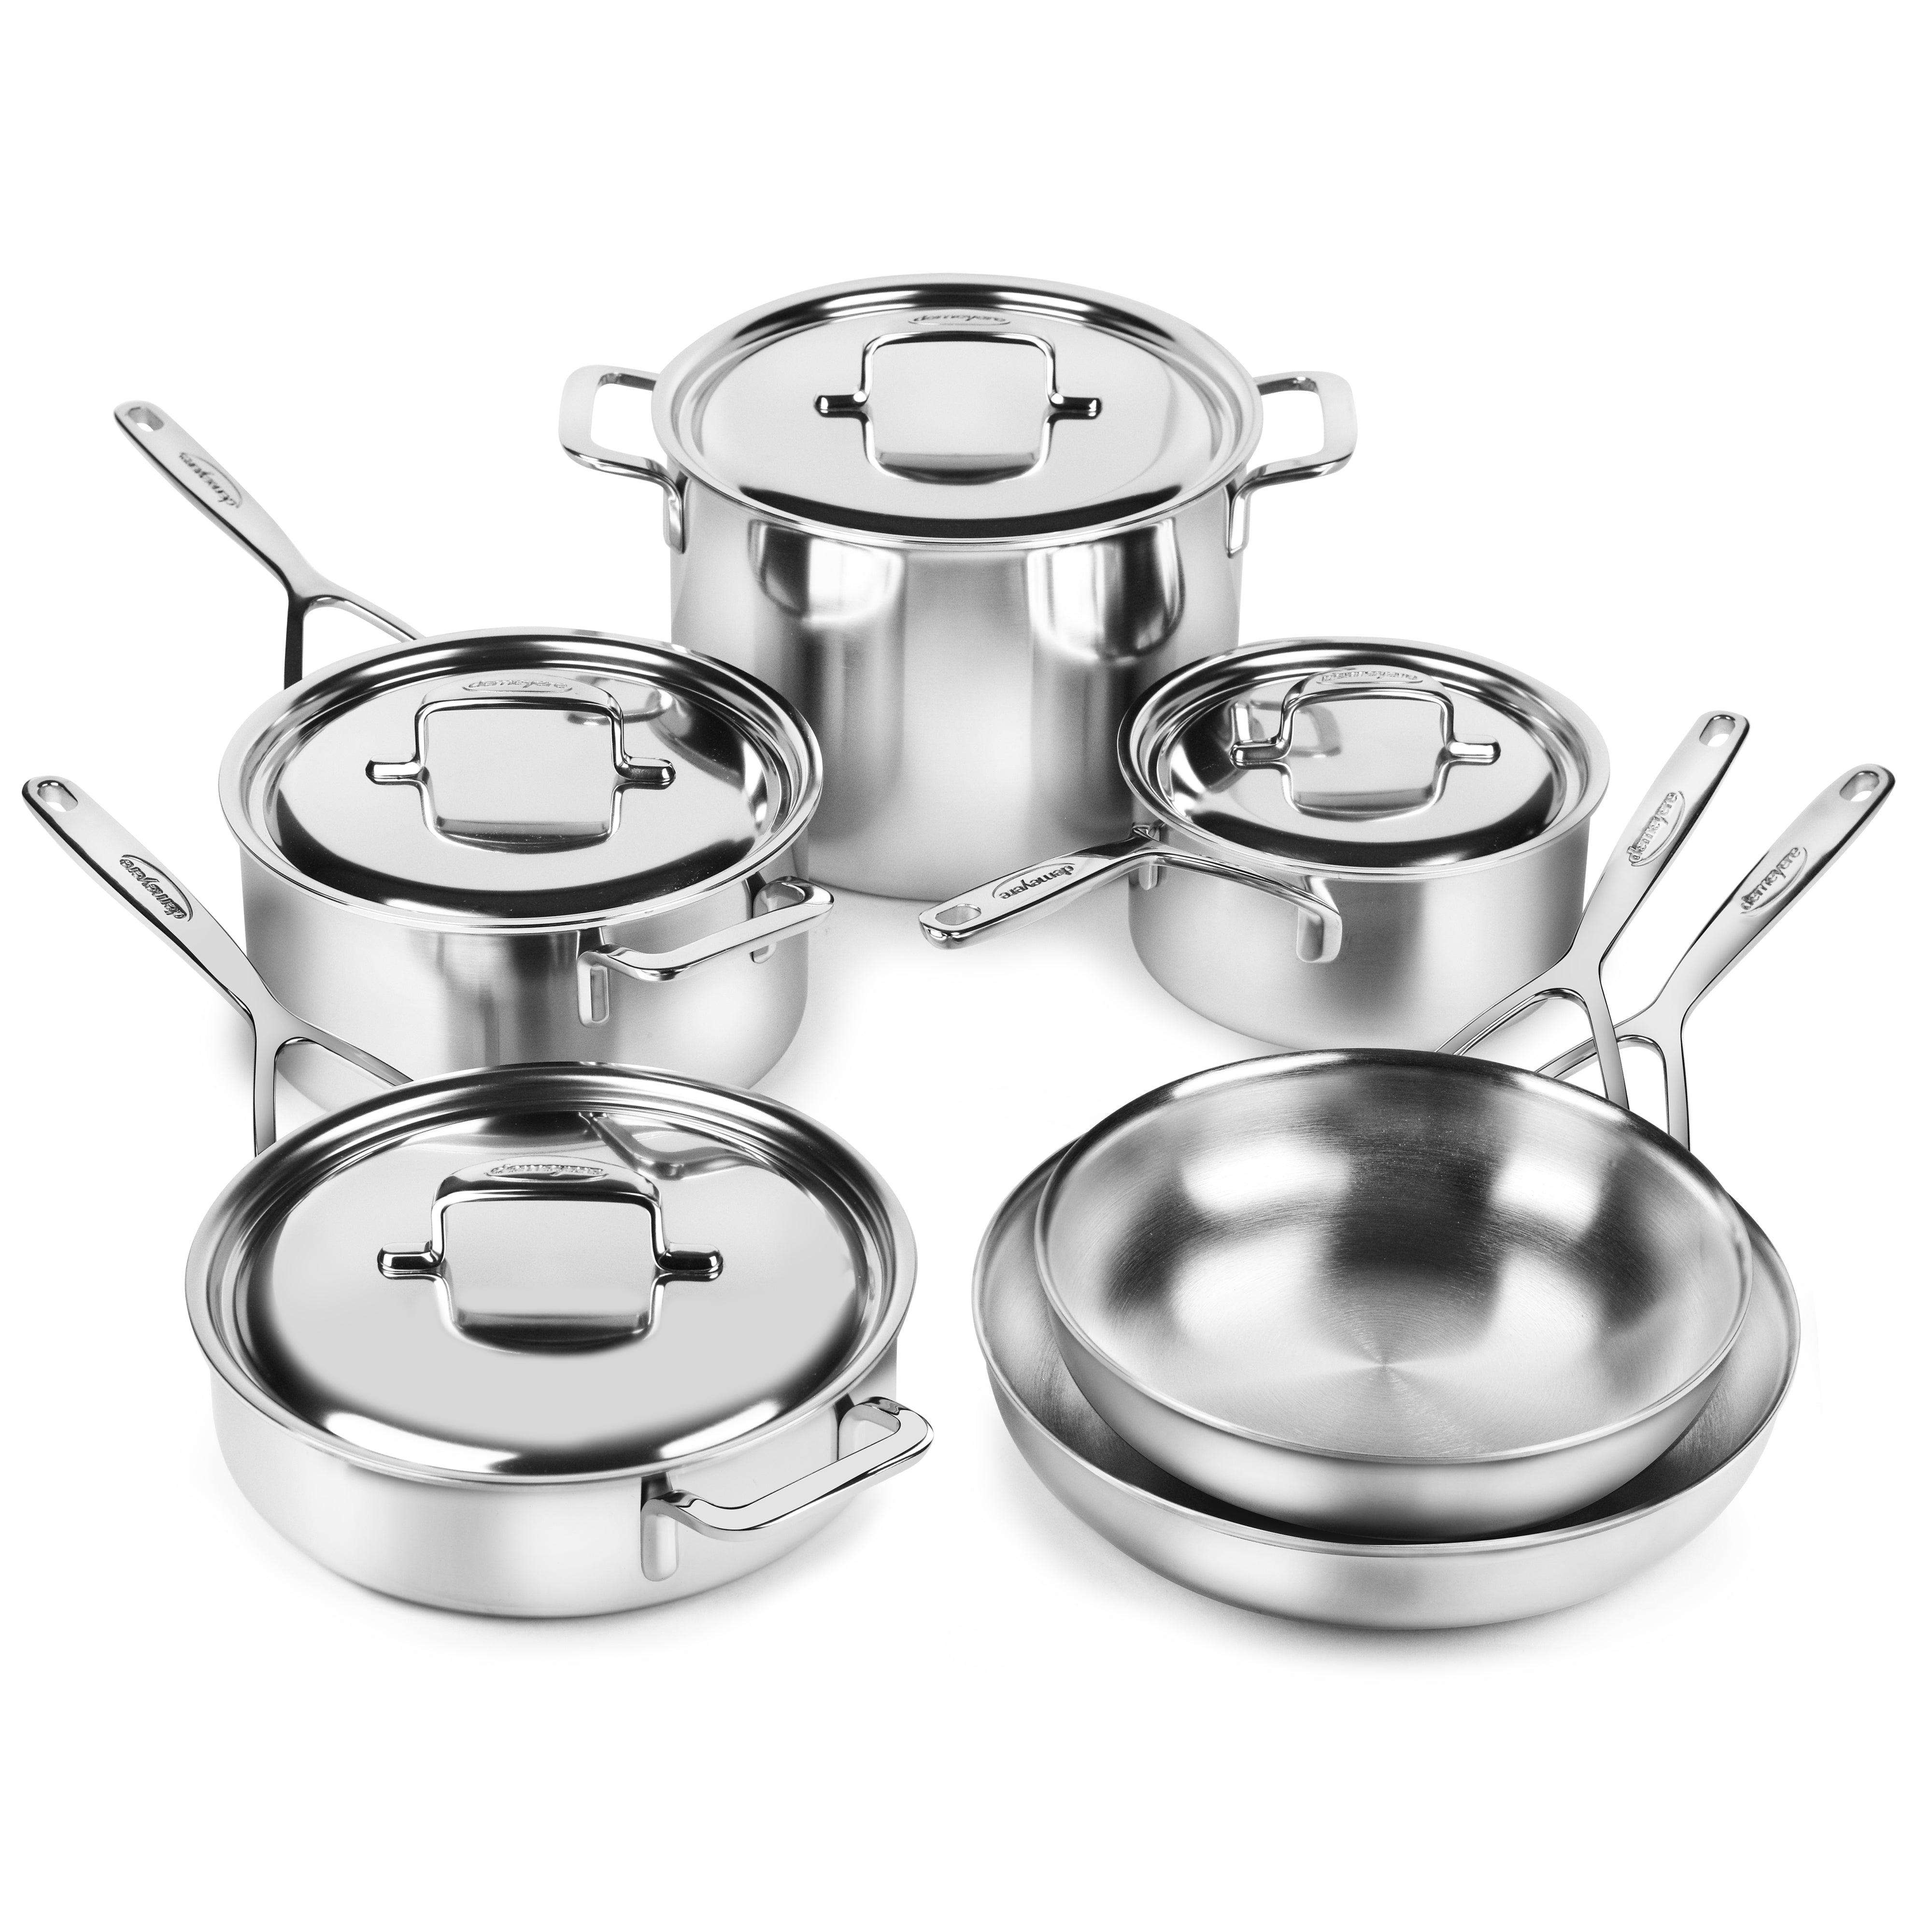 Demeyere Industry Stainless Steel Saucepan 2 qt with Lid